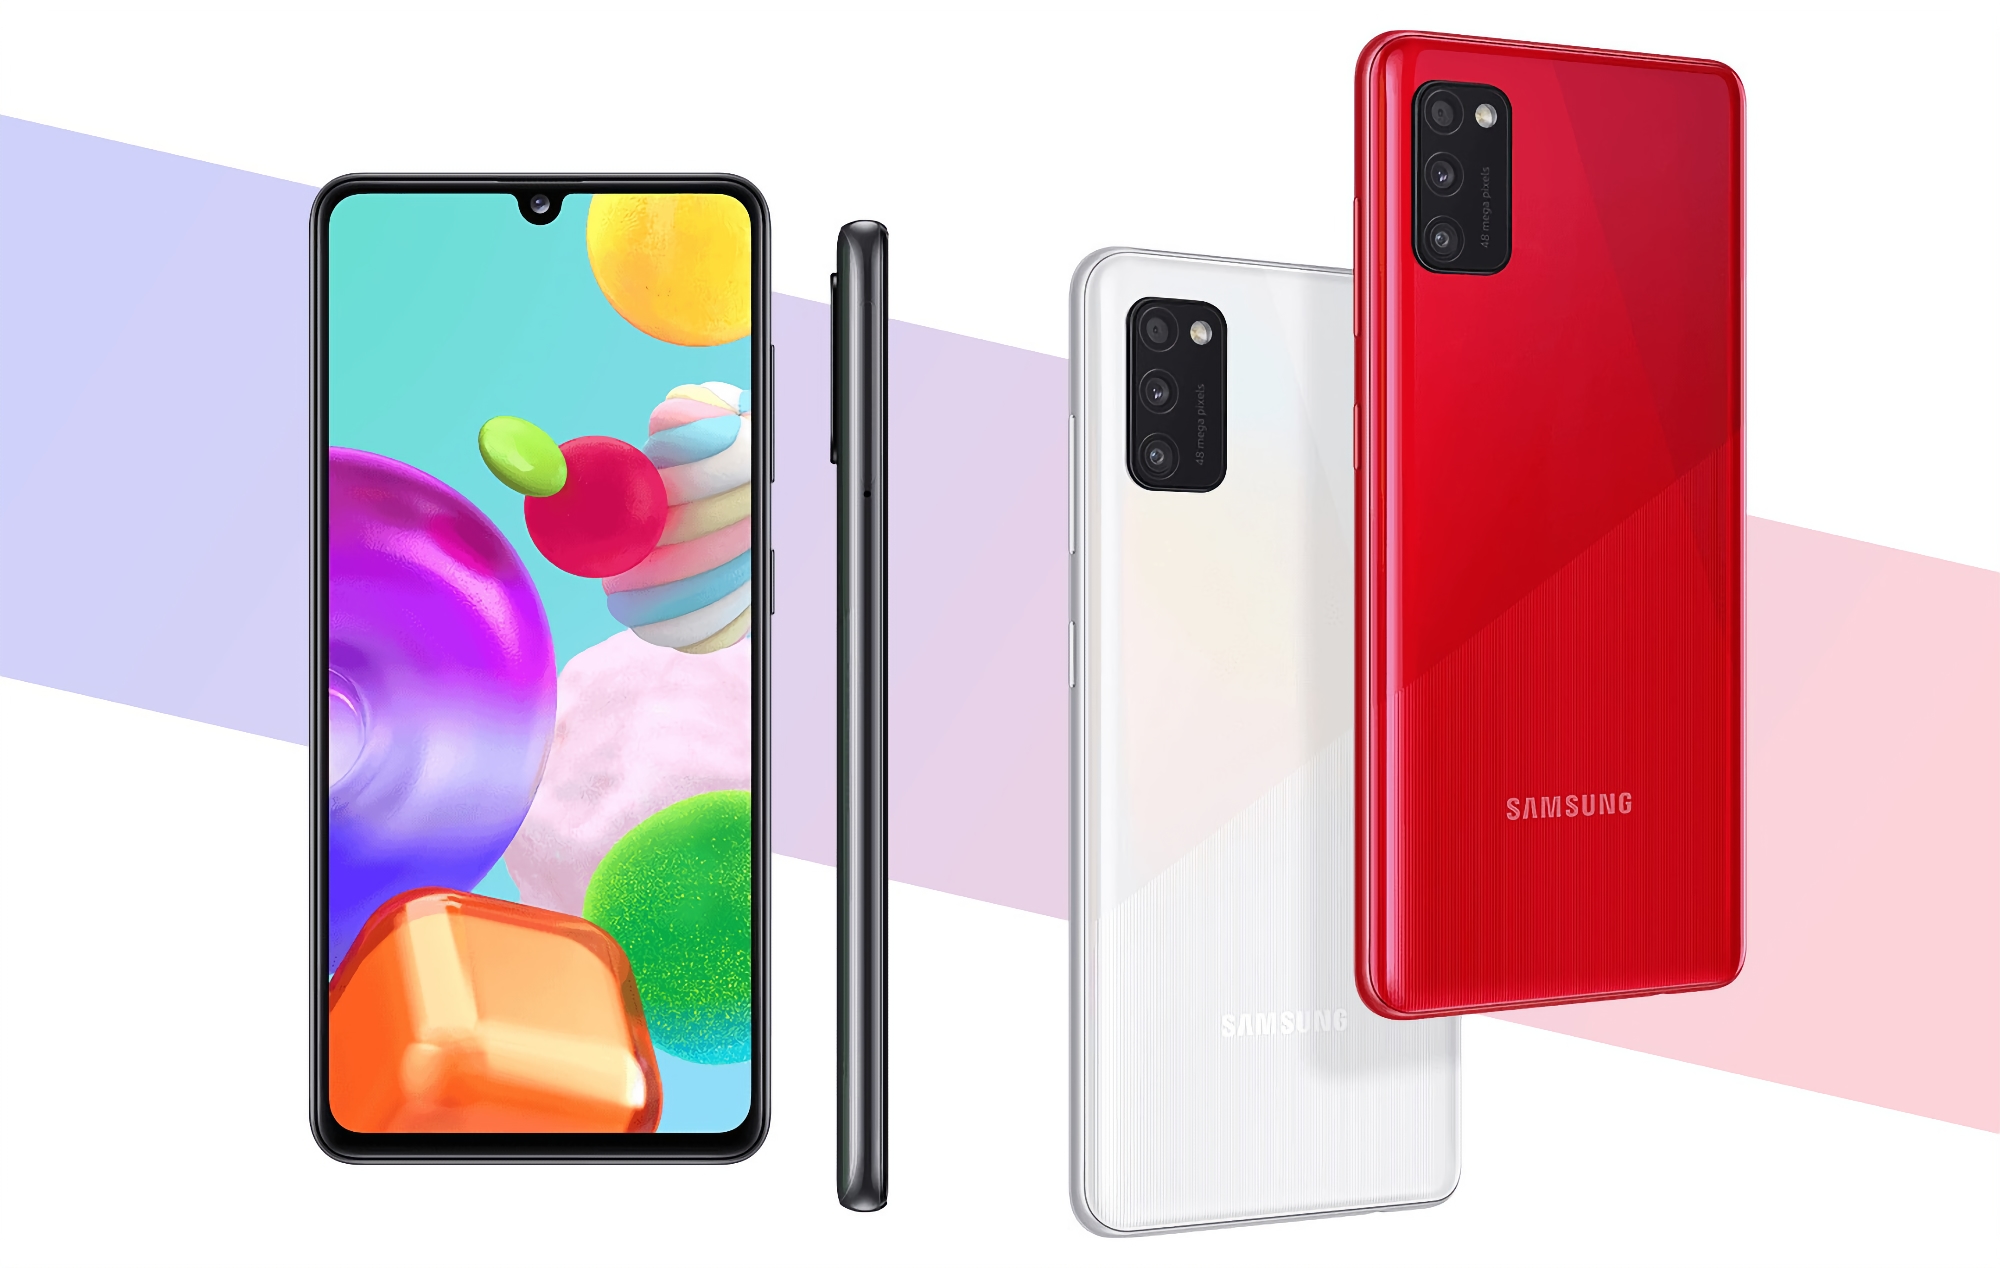 Following Galaxy A22: Samsung releases Android 12 update with One UI 4.1 for Galaxy A41